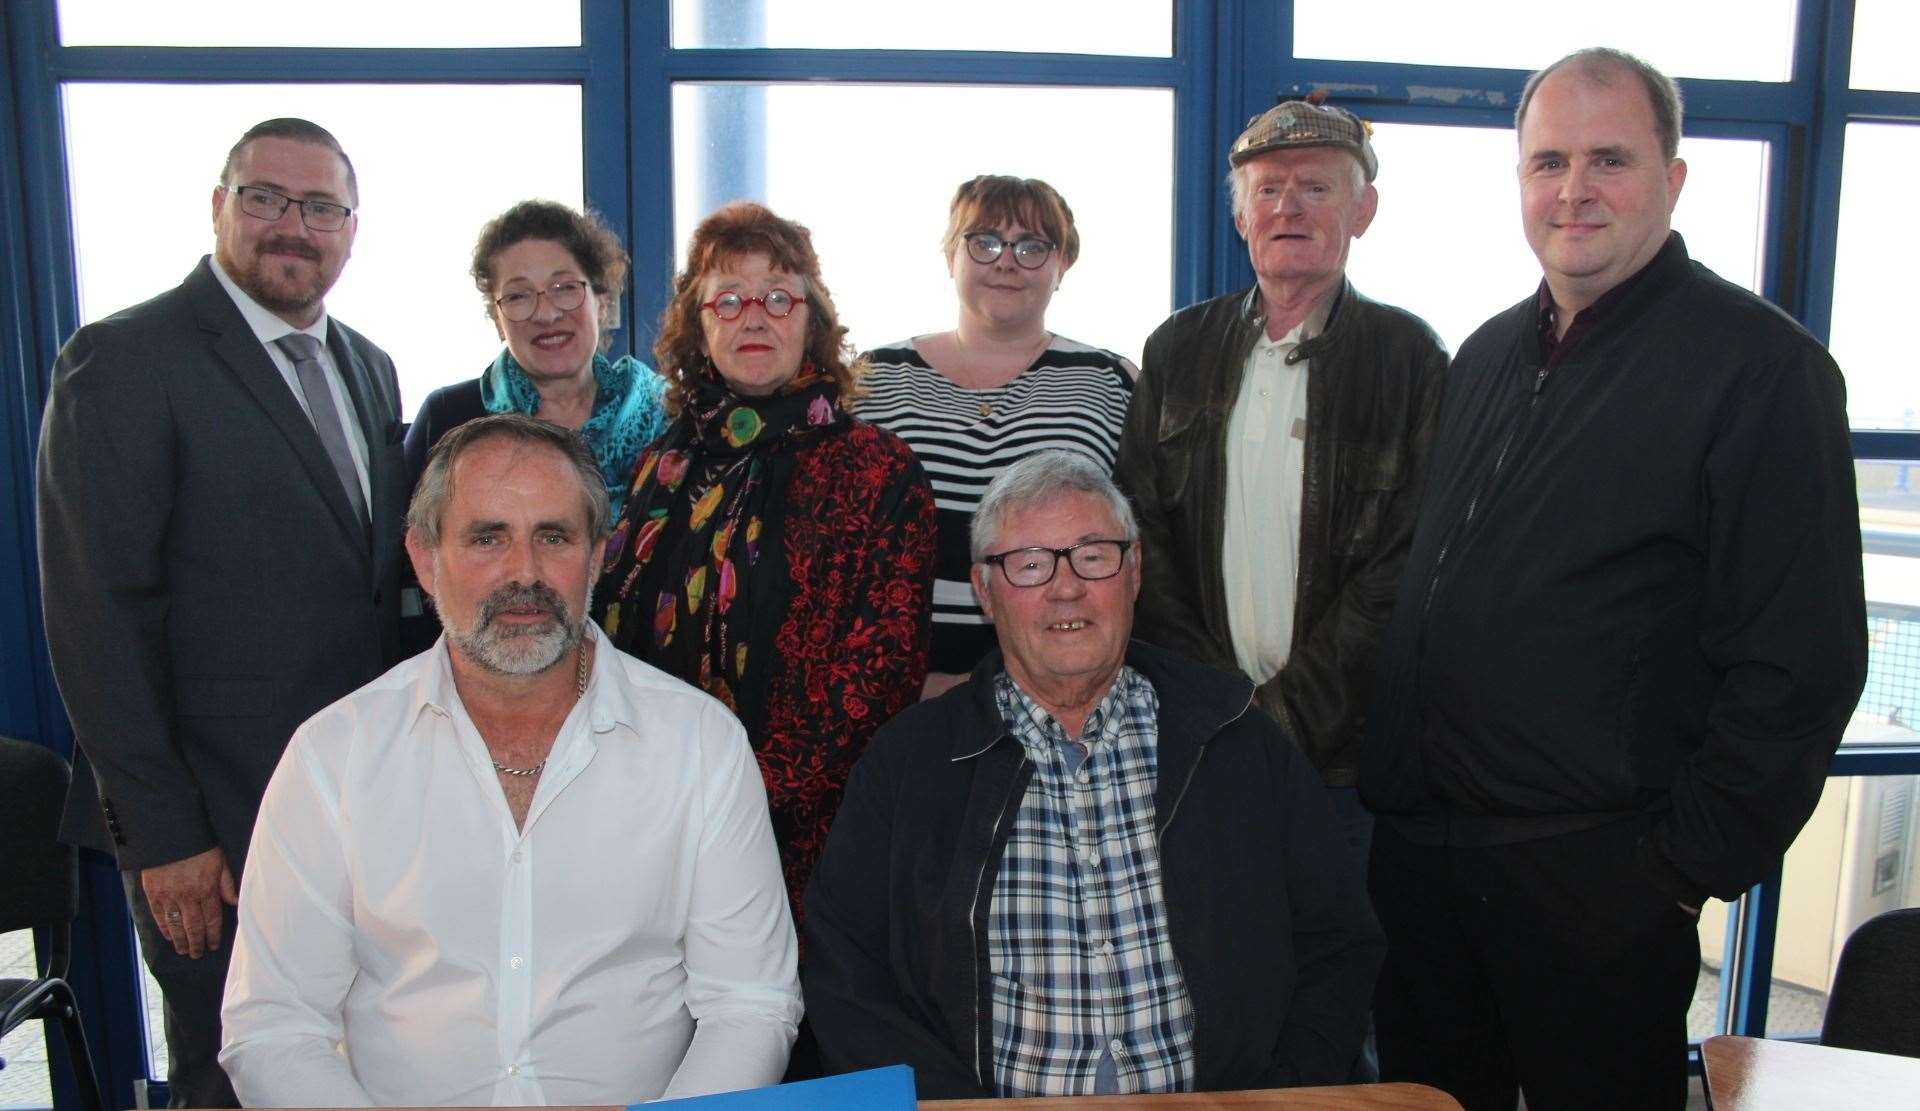 Happier days: the first meeting of the Sheerness Town Council with chairman Matthew Brown, seated left, with vice-chairman Brian Spoor and, from the left, Lee McCall, Amanda Green, Chris Reed, Cherise Moorcroft, Malcolm Staines and Chris Foulds